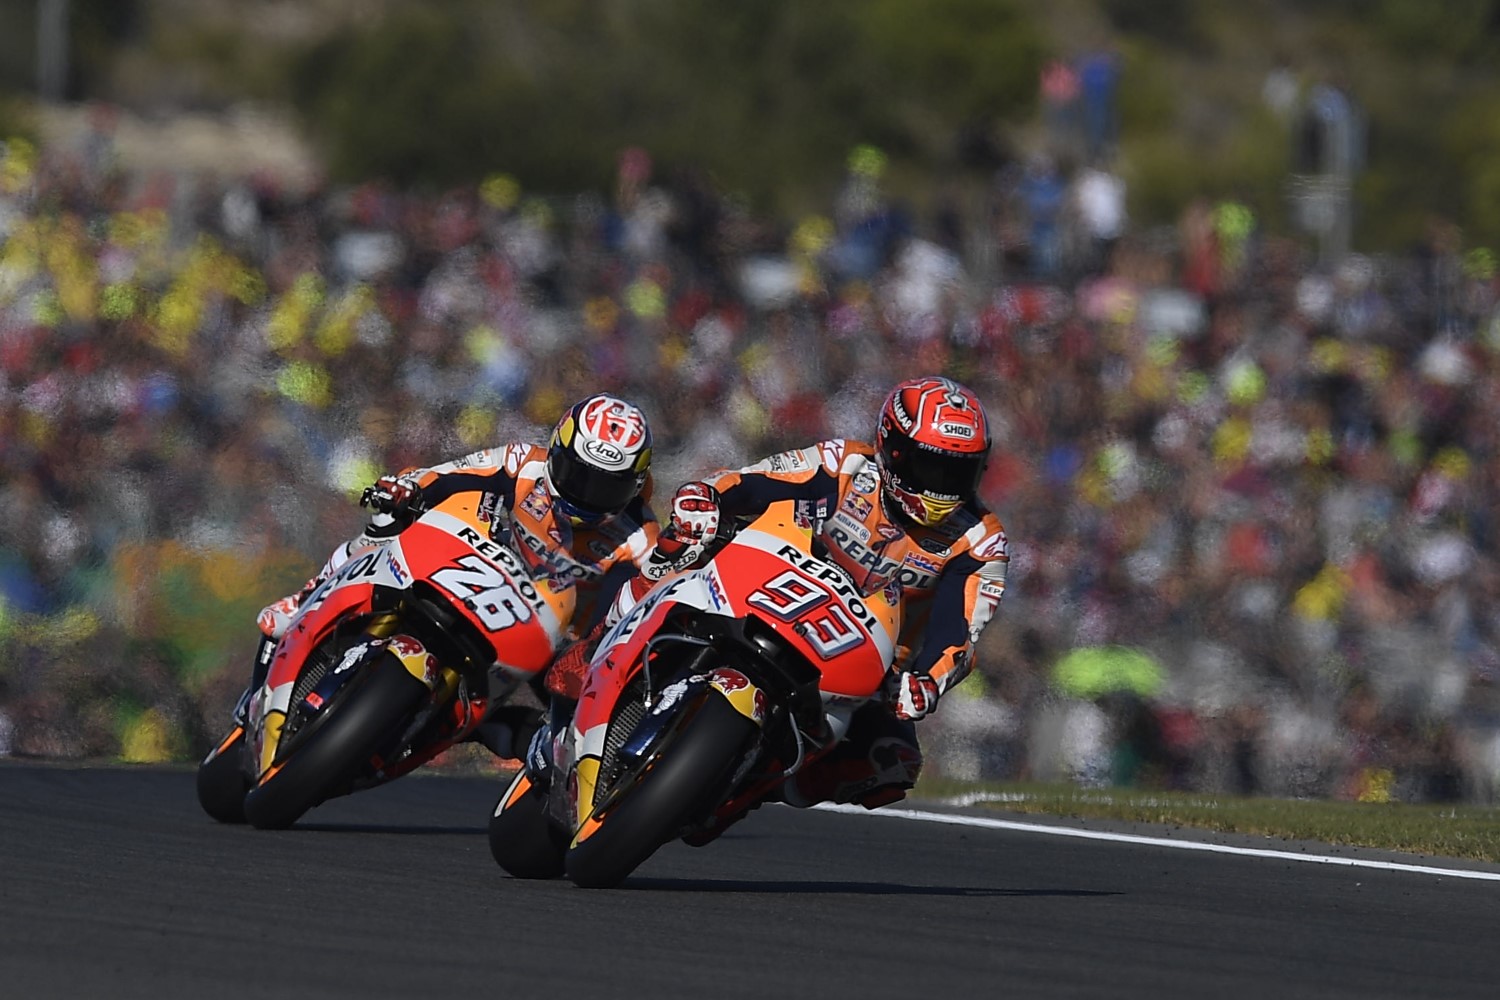 Marquez leads Pedrosa early